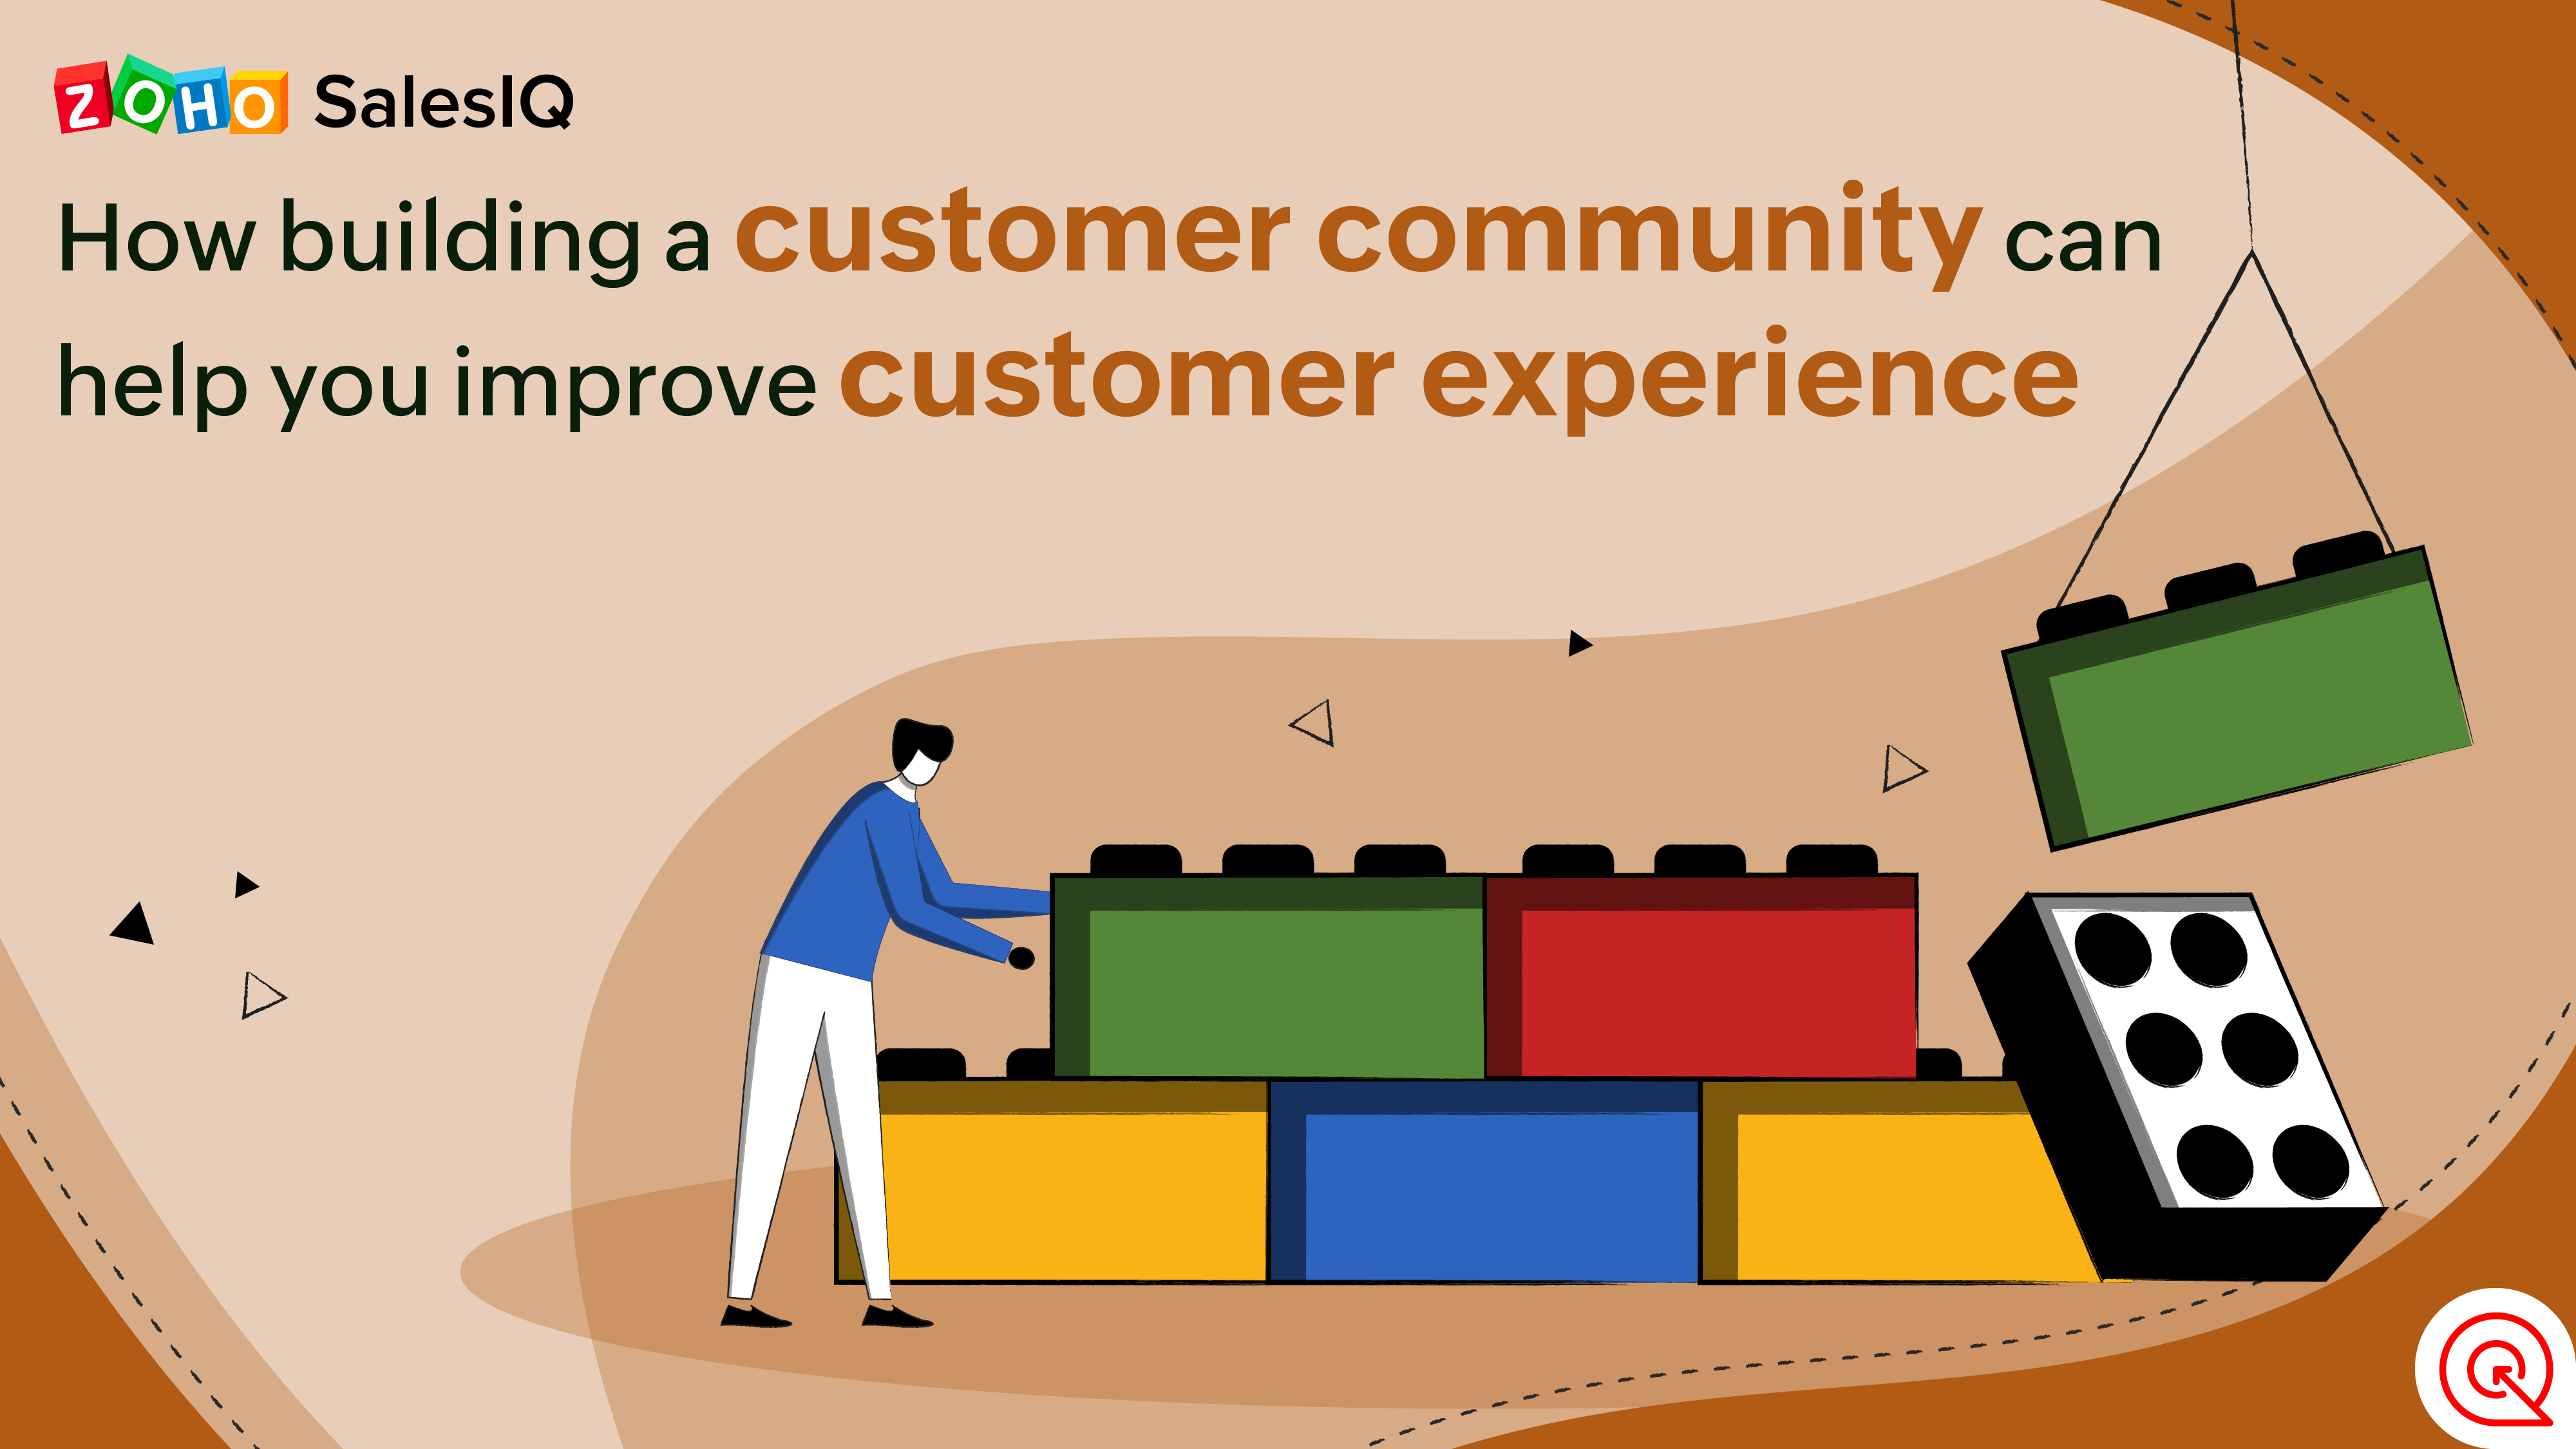 How building a customer community can help you improve customer experience